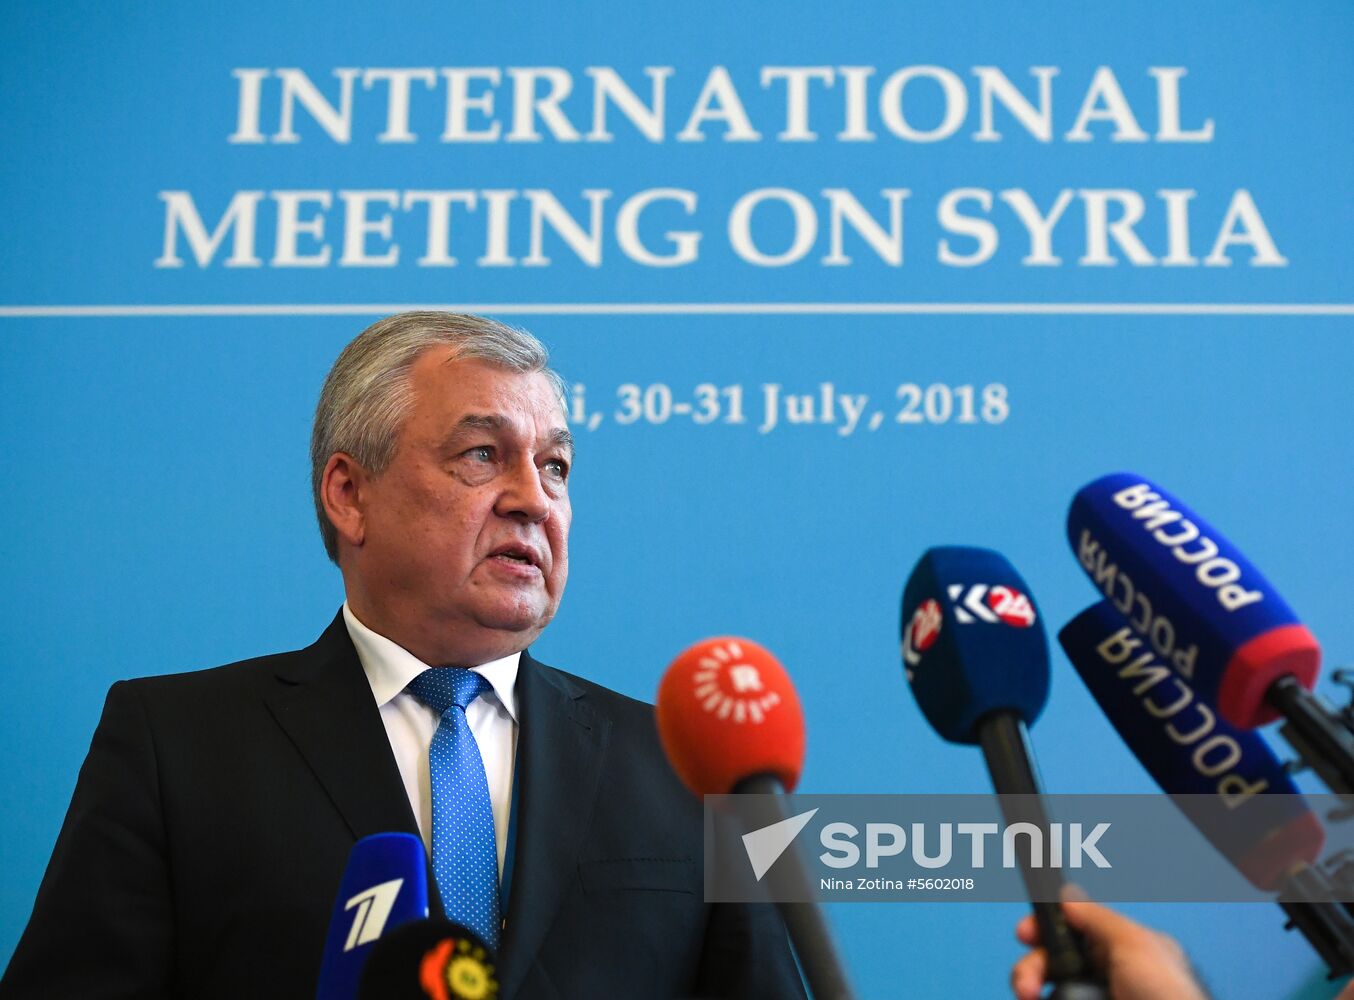 Tenth international meeting on Syria in Astana format